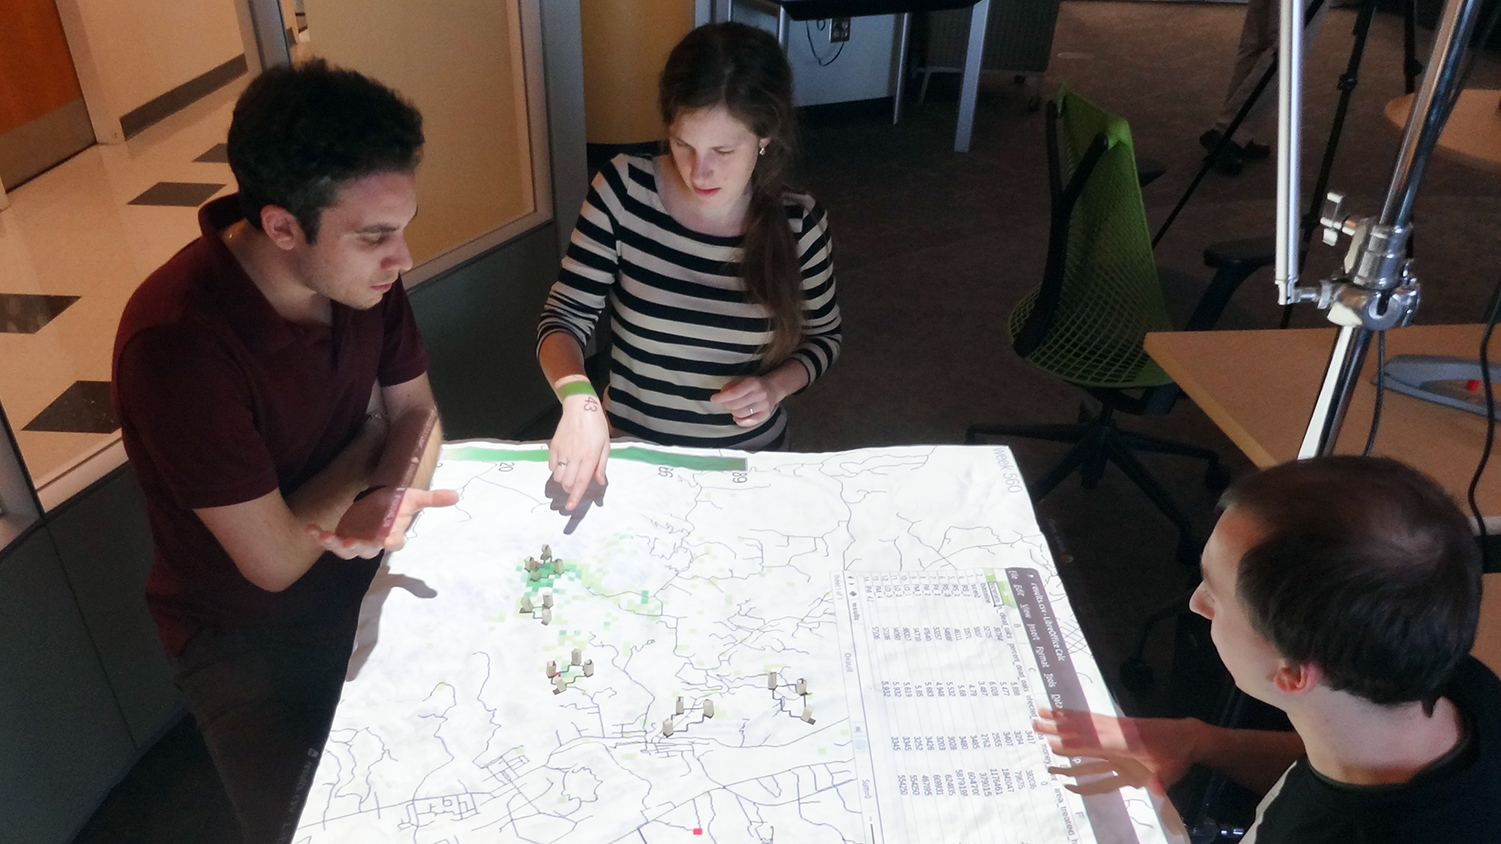 Students collaborating at the North Carolina State University Center for Geospatial Analytics